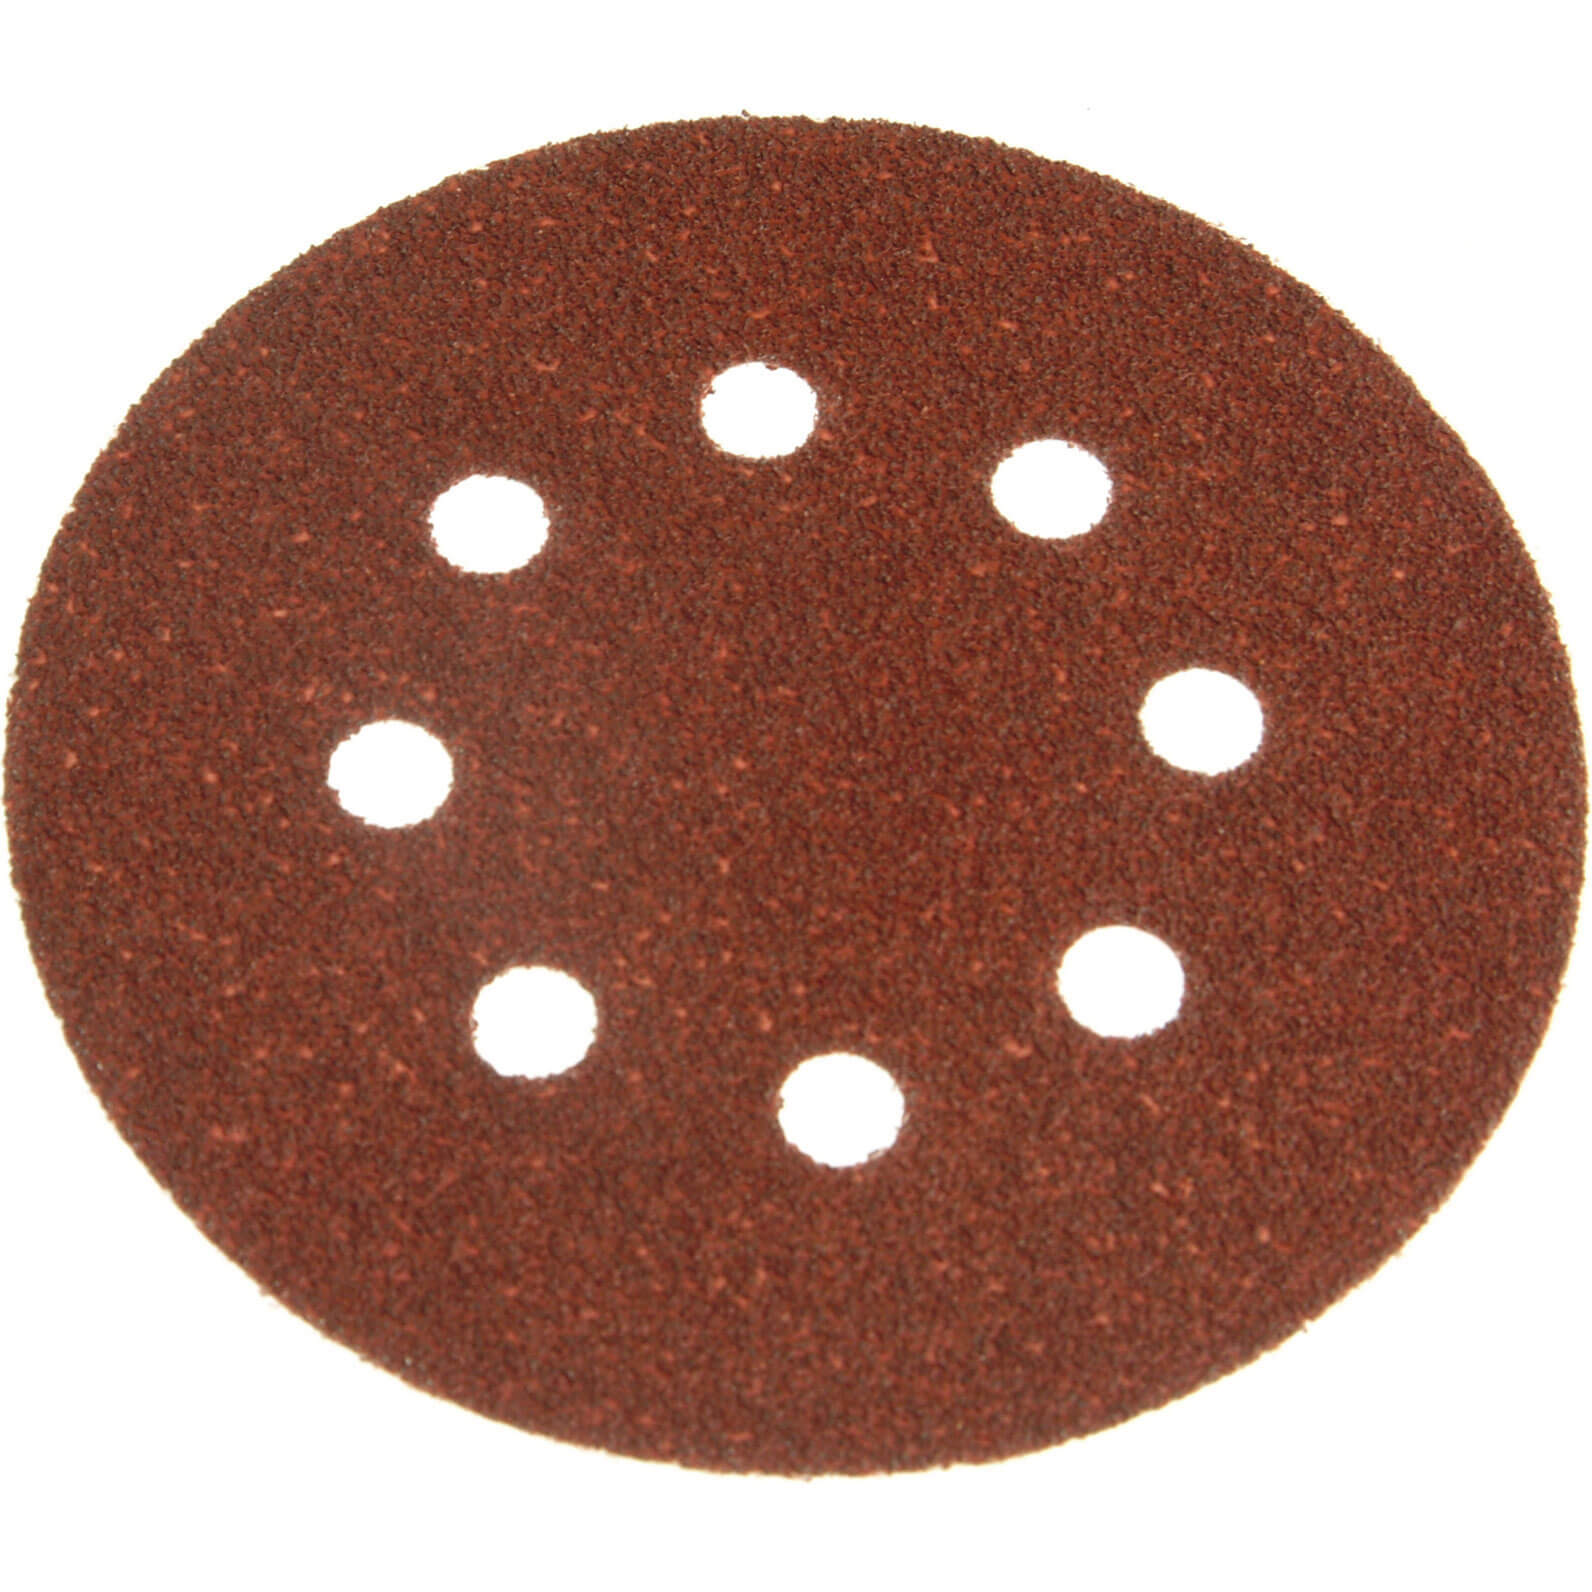 Image of Black and Decker Piranha Quick Fit ROS Sanding Discs 125mm 125mm 60g Pack of 5